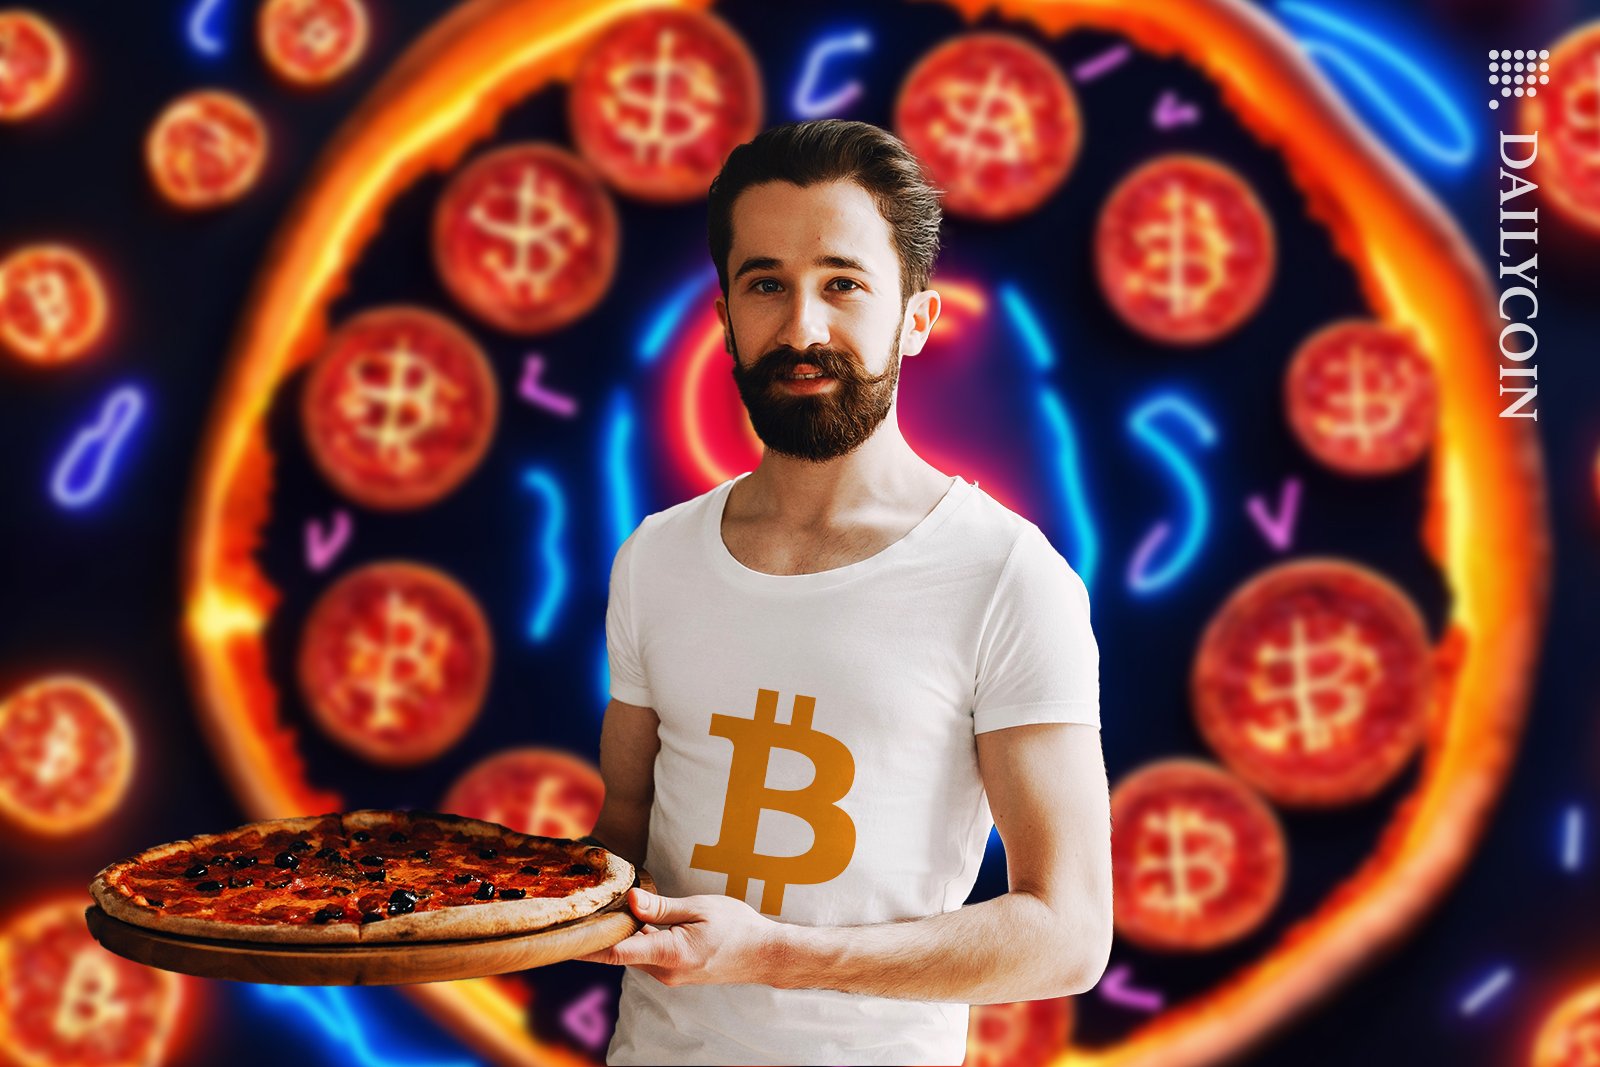 Guy with a pizza, wearing a bitcoin t-shirt.